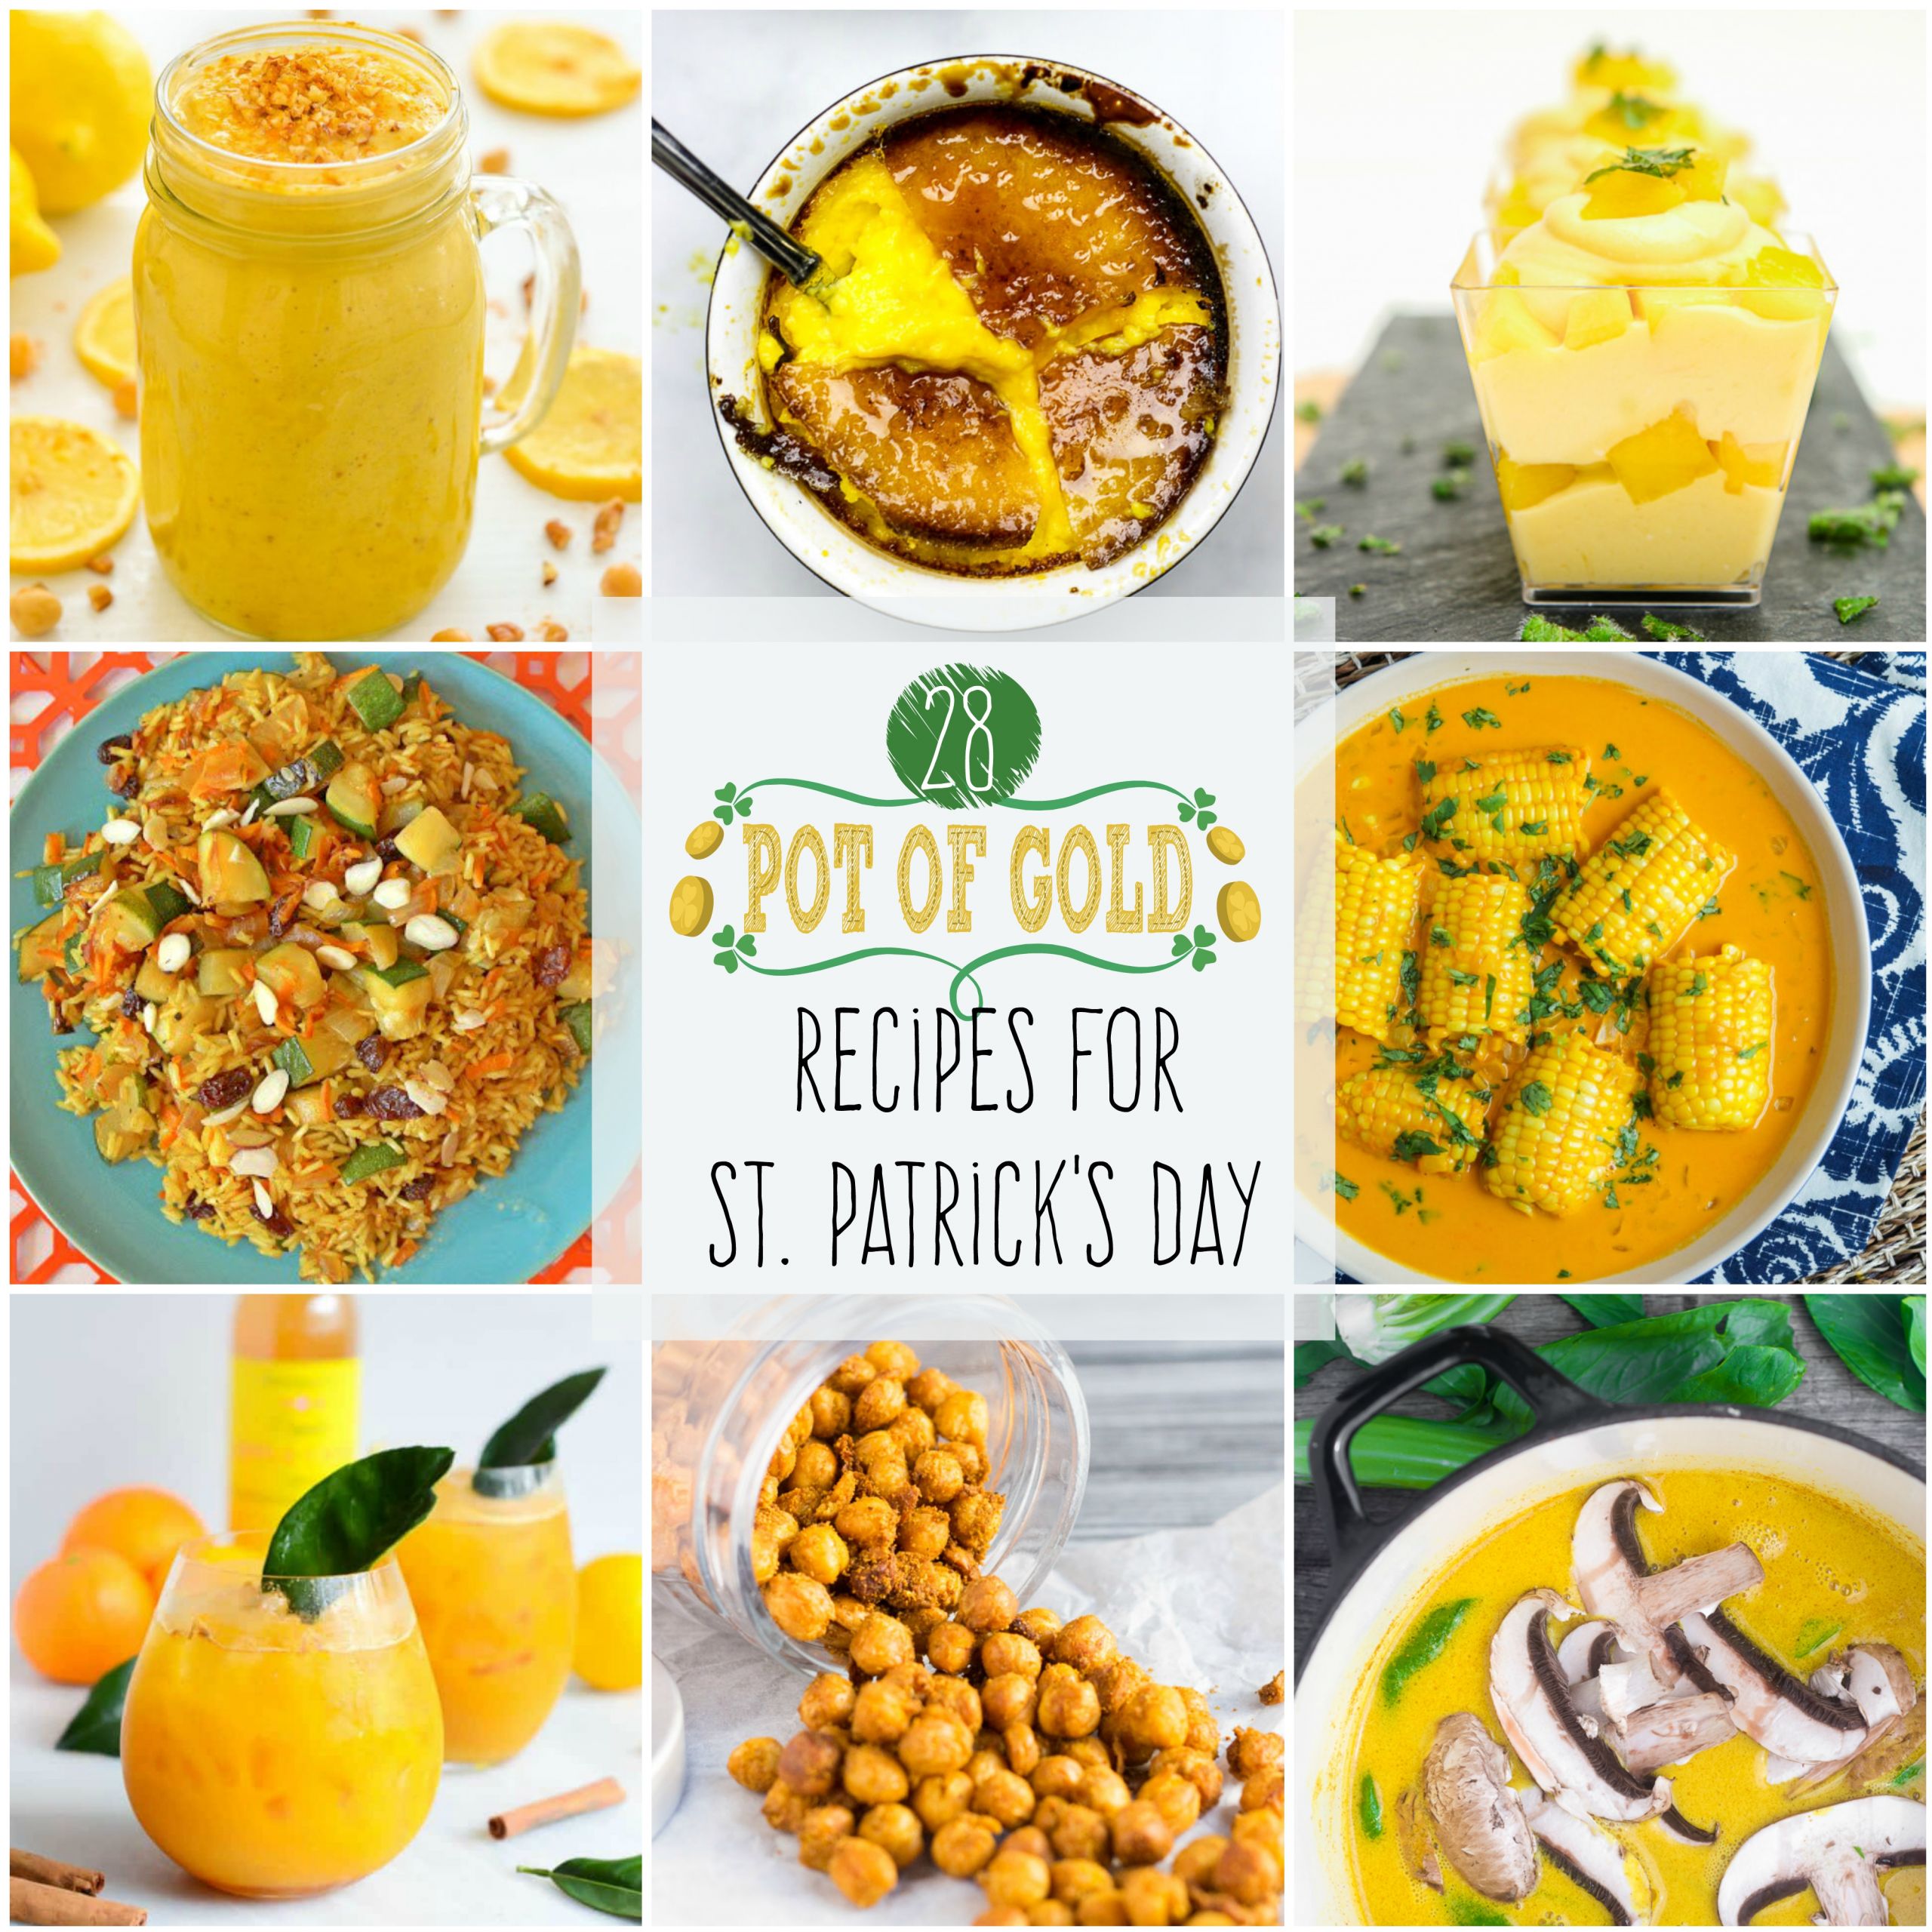 Recipes For St Patrick's Day Party
 28 "Pot of Gold" Recipes for St Patrick s Day